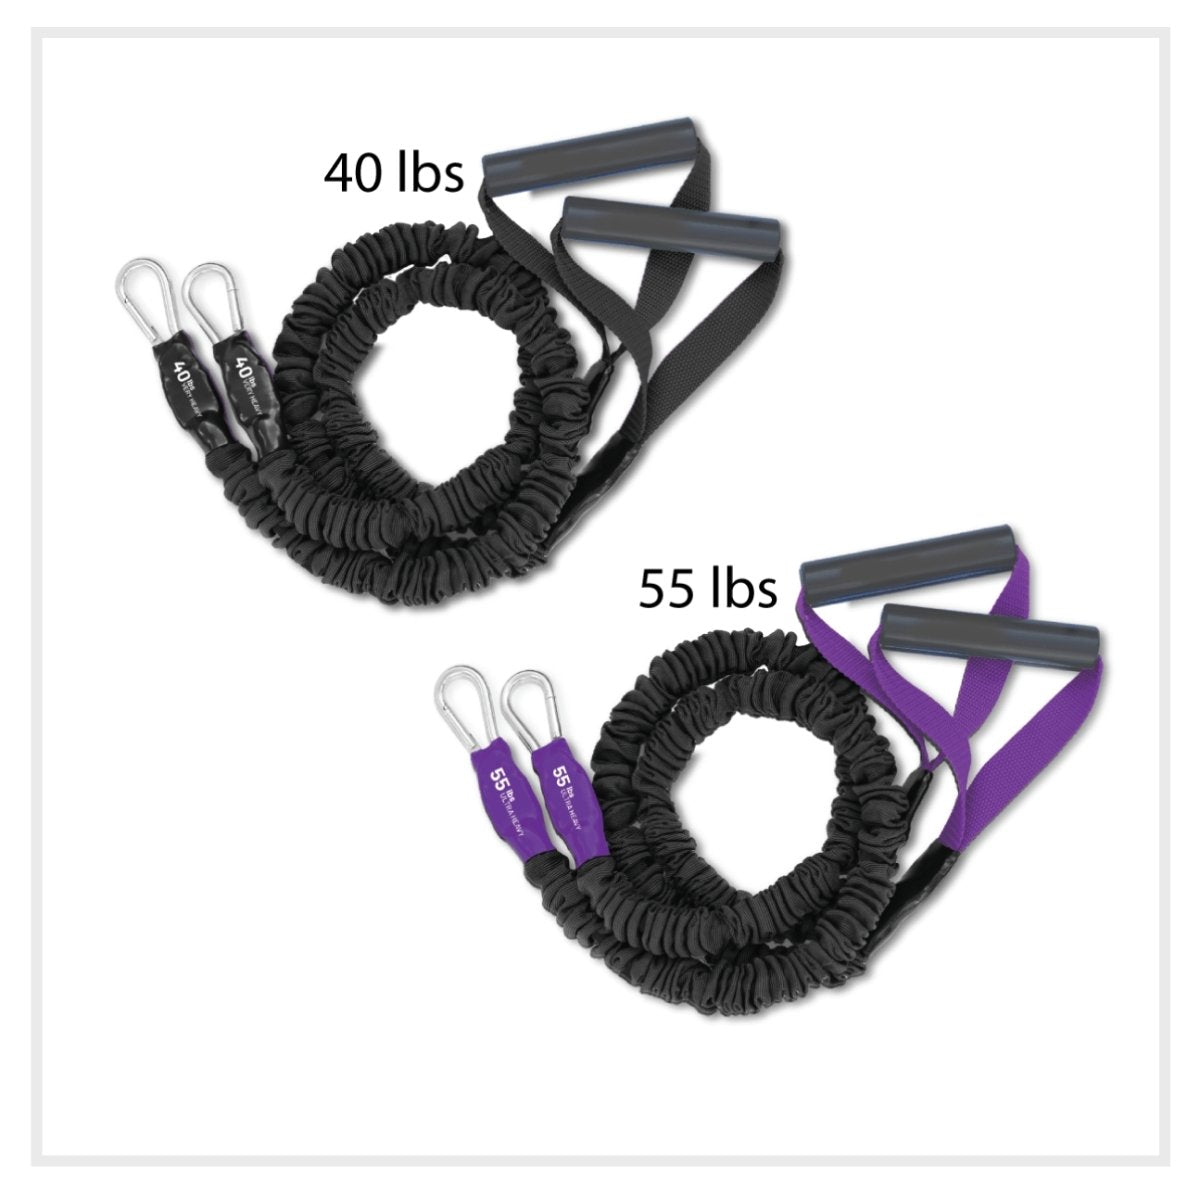 SHOULDER AND ARM MUSCLE DEFINITION RESISTANCE BANDS. BUILD THE MUSCLES IN YOUR SHOULDER TO LIFHT HEAVIER WEIGHTS DURING CROSSFIT OR WEIGHT LIFTING EXERCES AND TRAINING